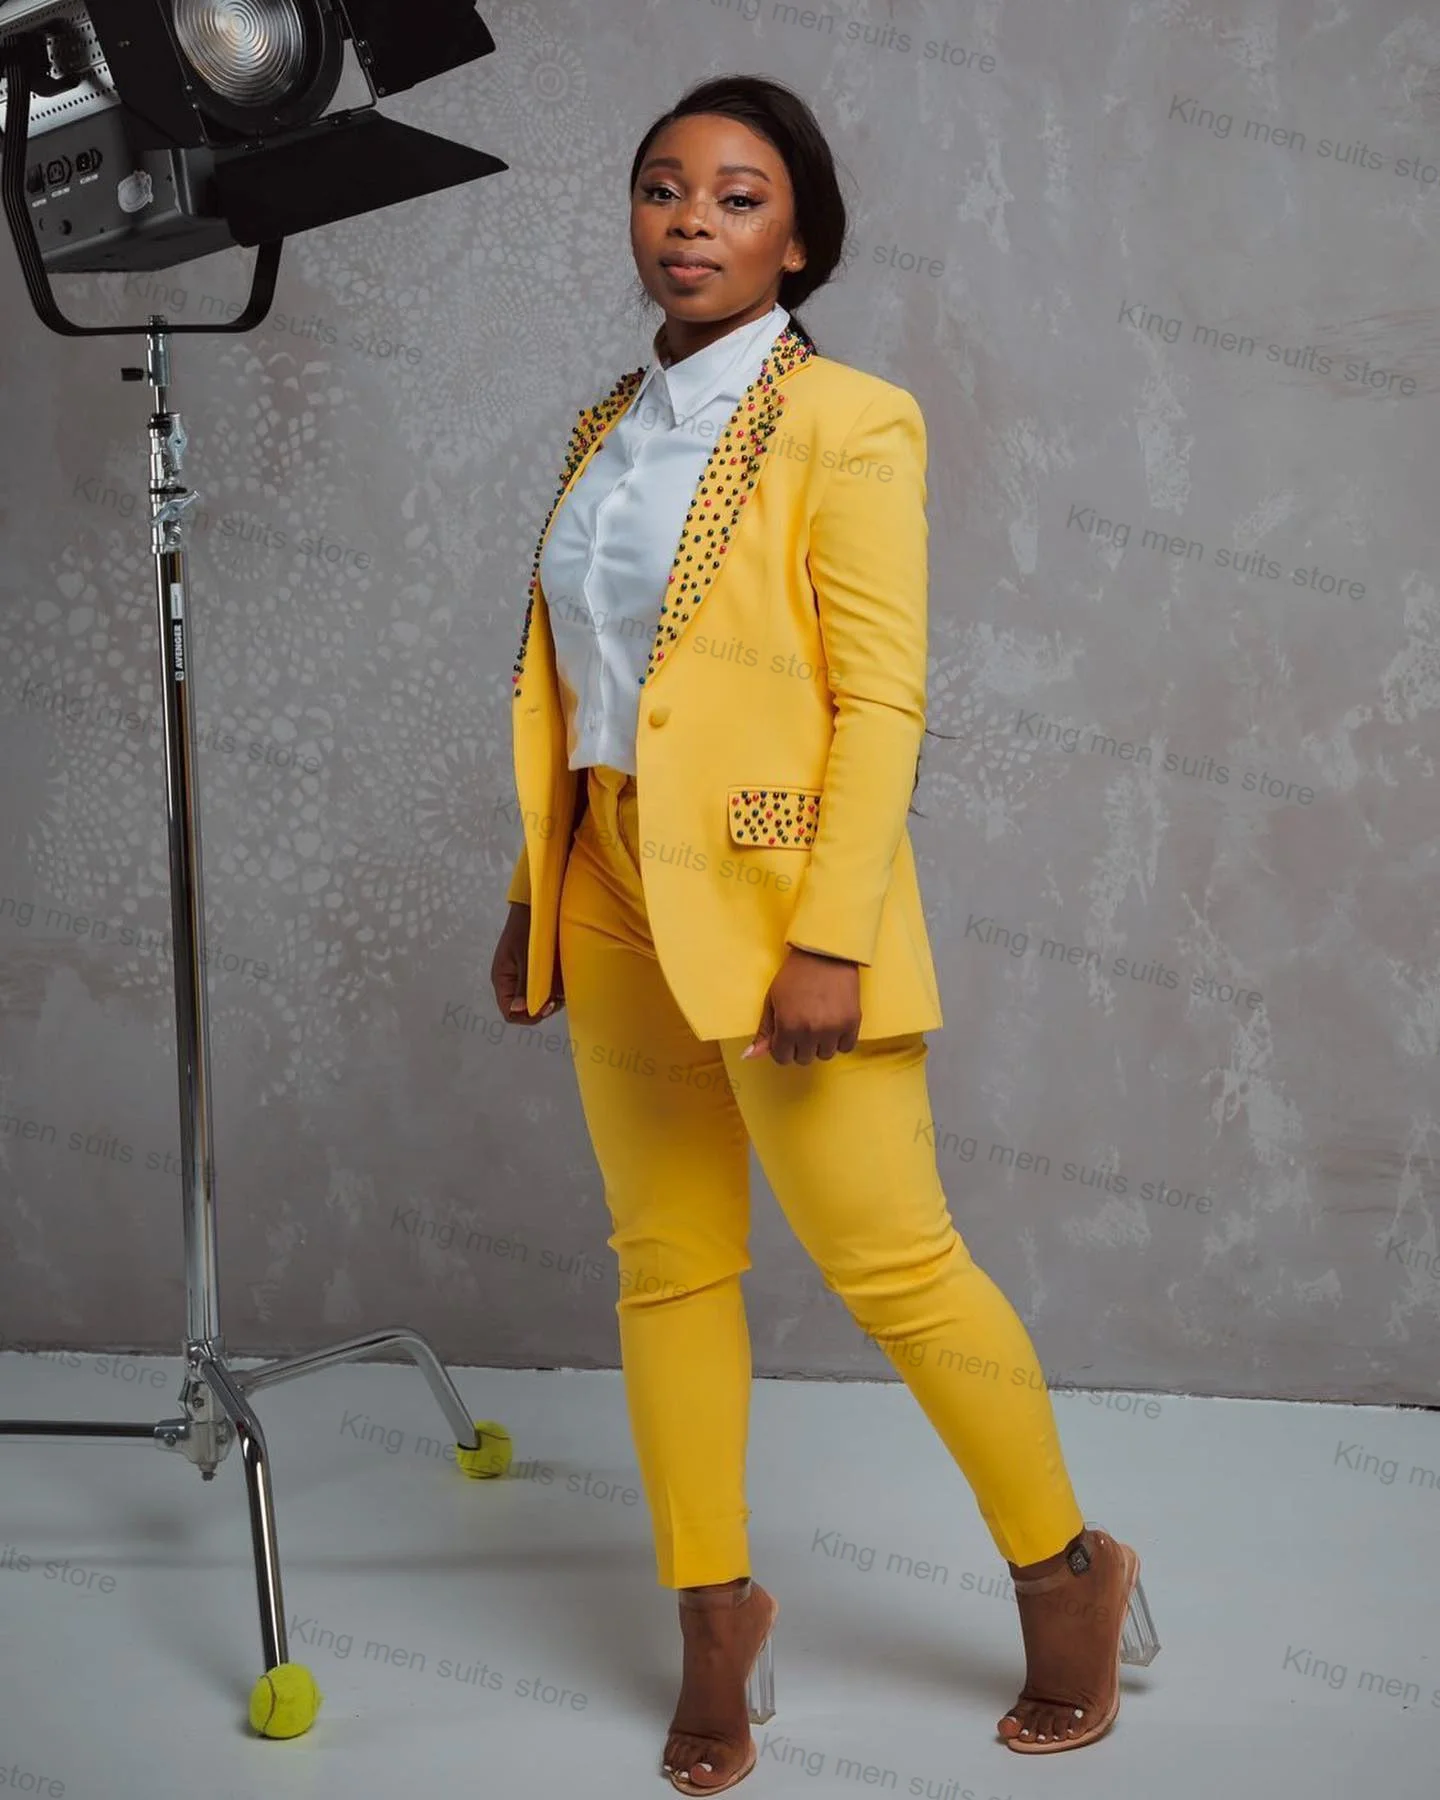 

Colored Pearls Wedding Women Suit Pants Set 2 Piece Yellow Blazer+Trouser Formal Office Lady Jacket Tailored Prom Dress Coat